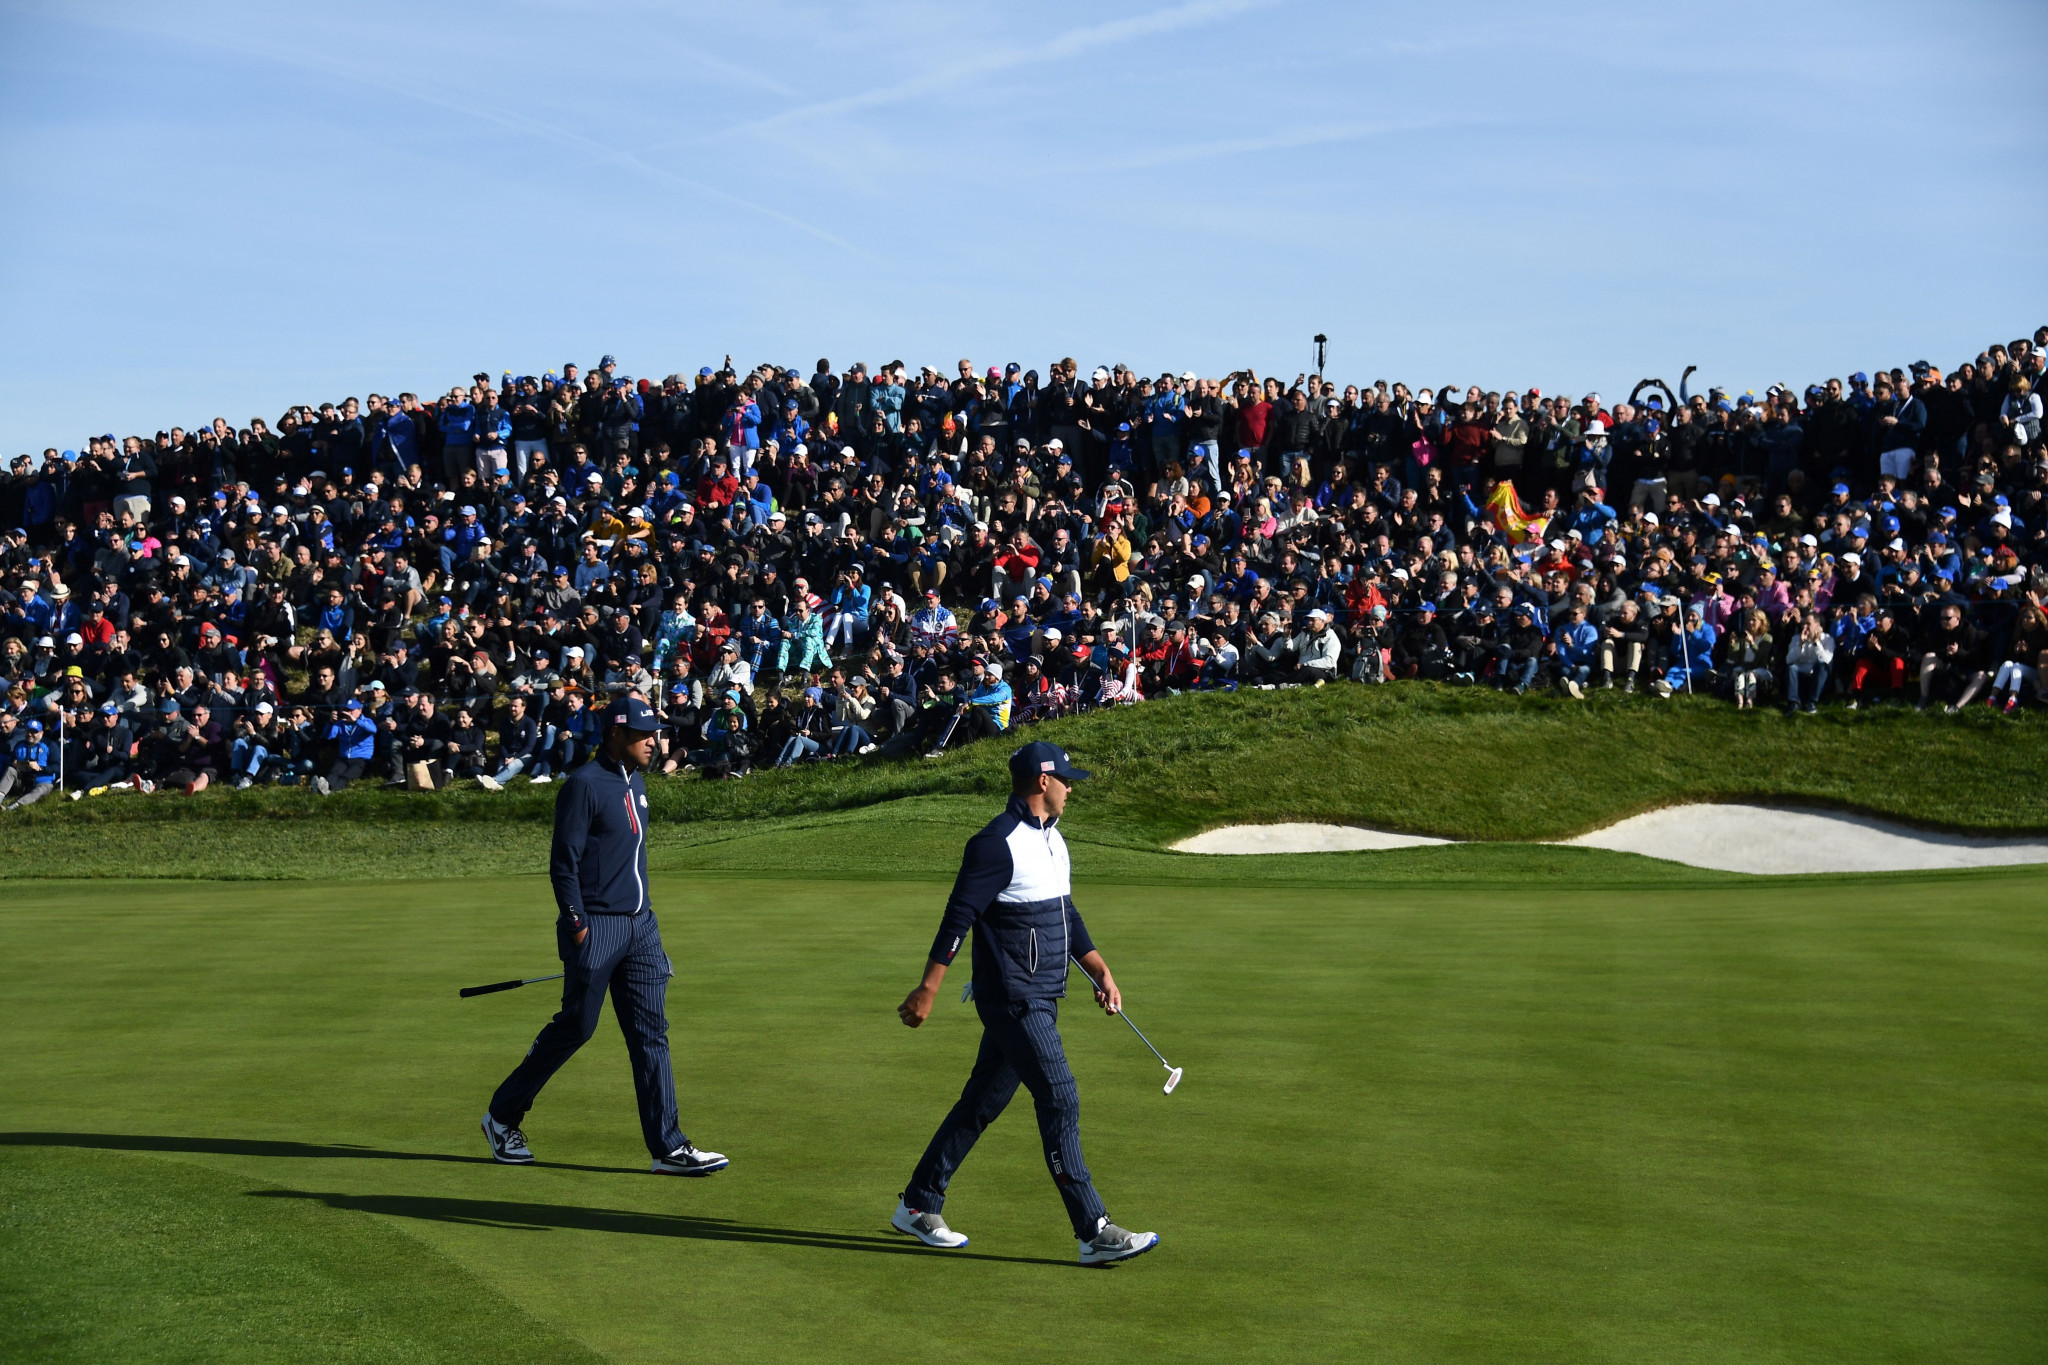 The 2018 Ryder Cup gave an economic boost of €235 million to France ©Getty Images